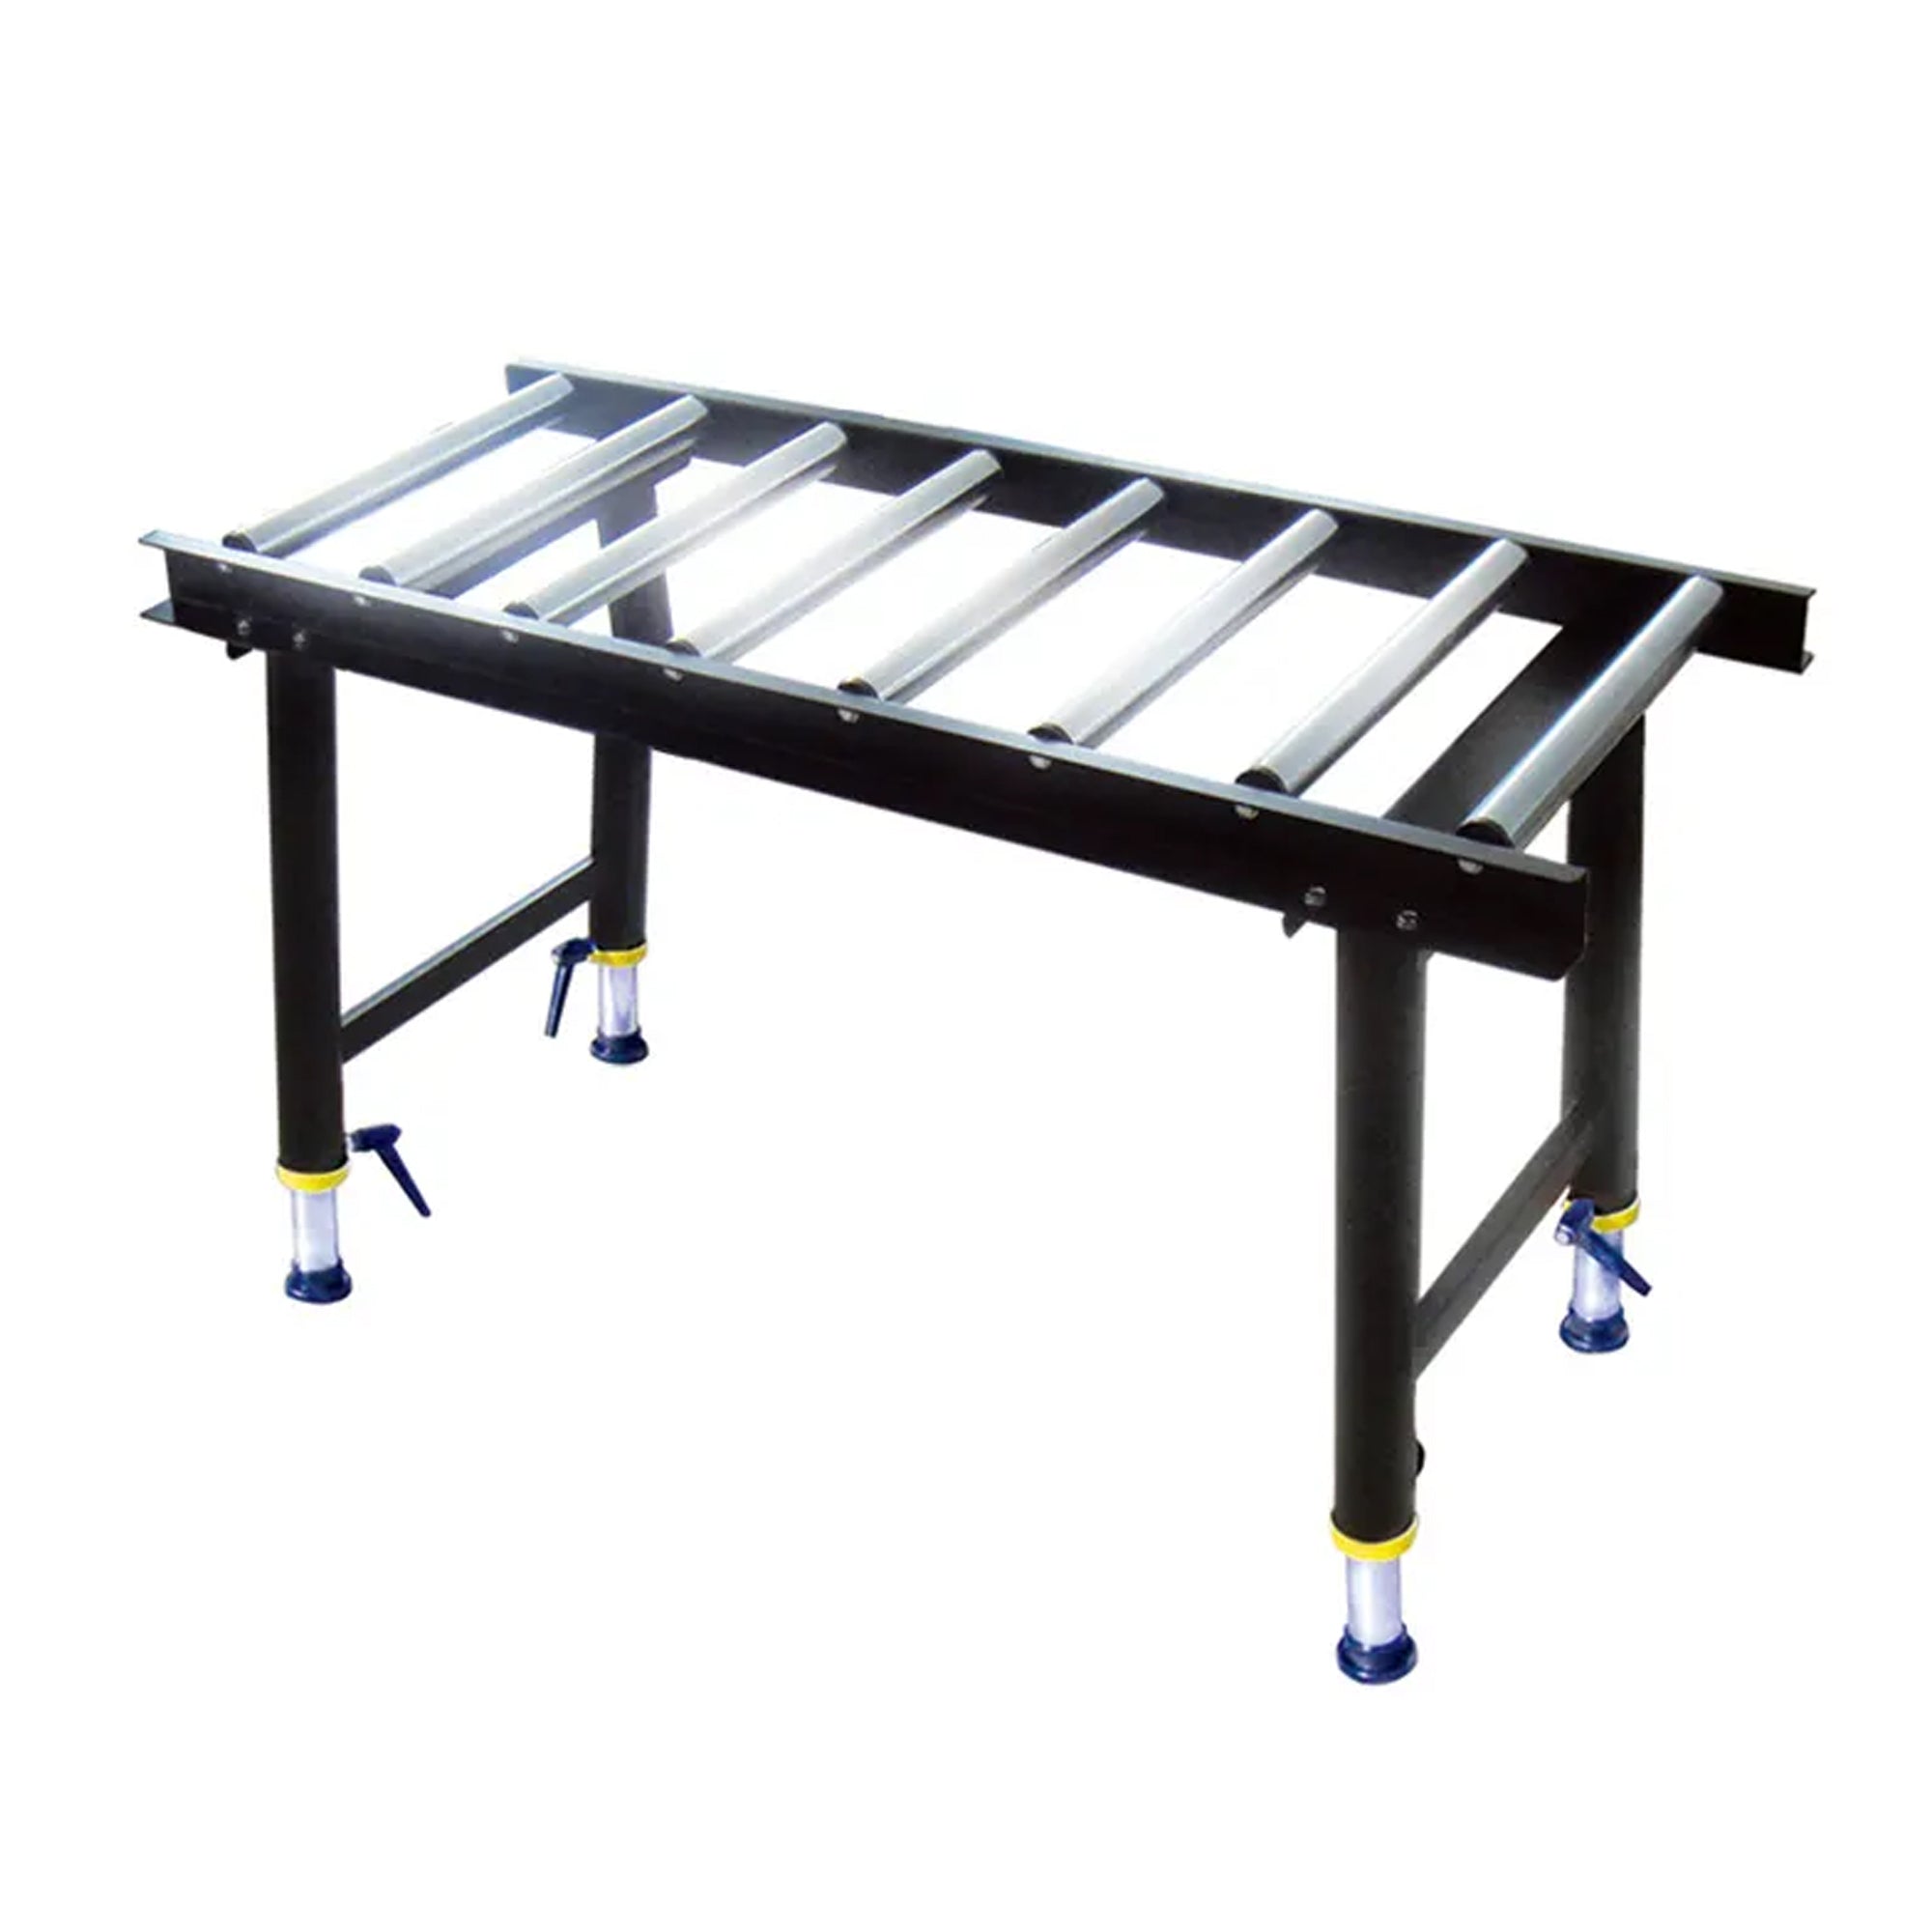 Roller Stands - Conveyor Style